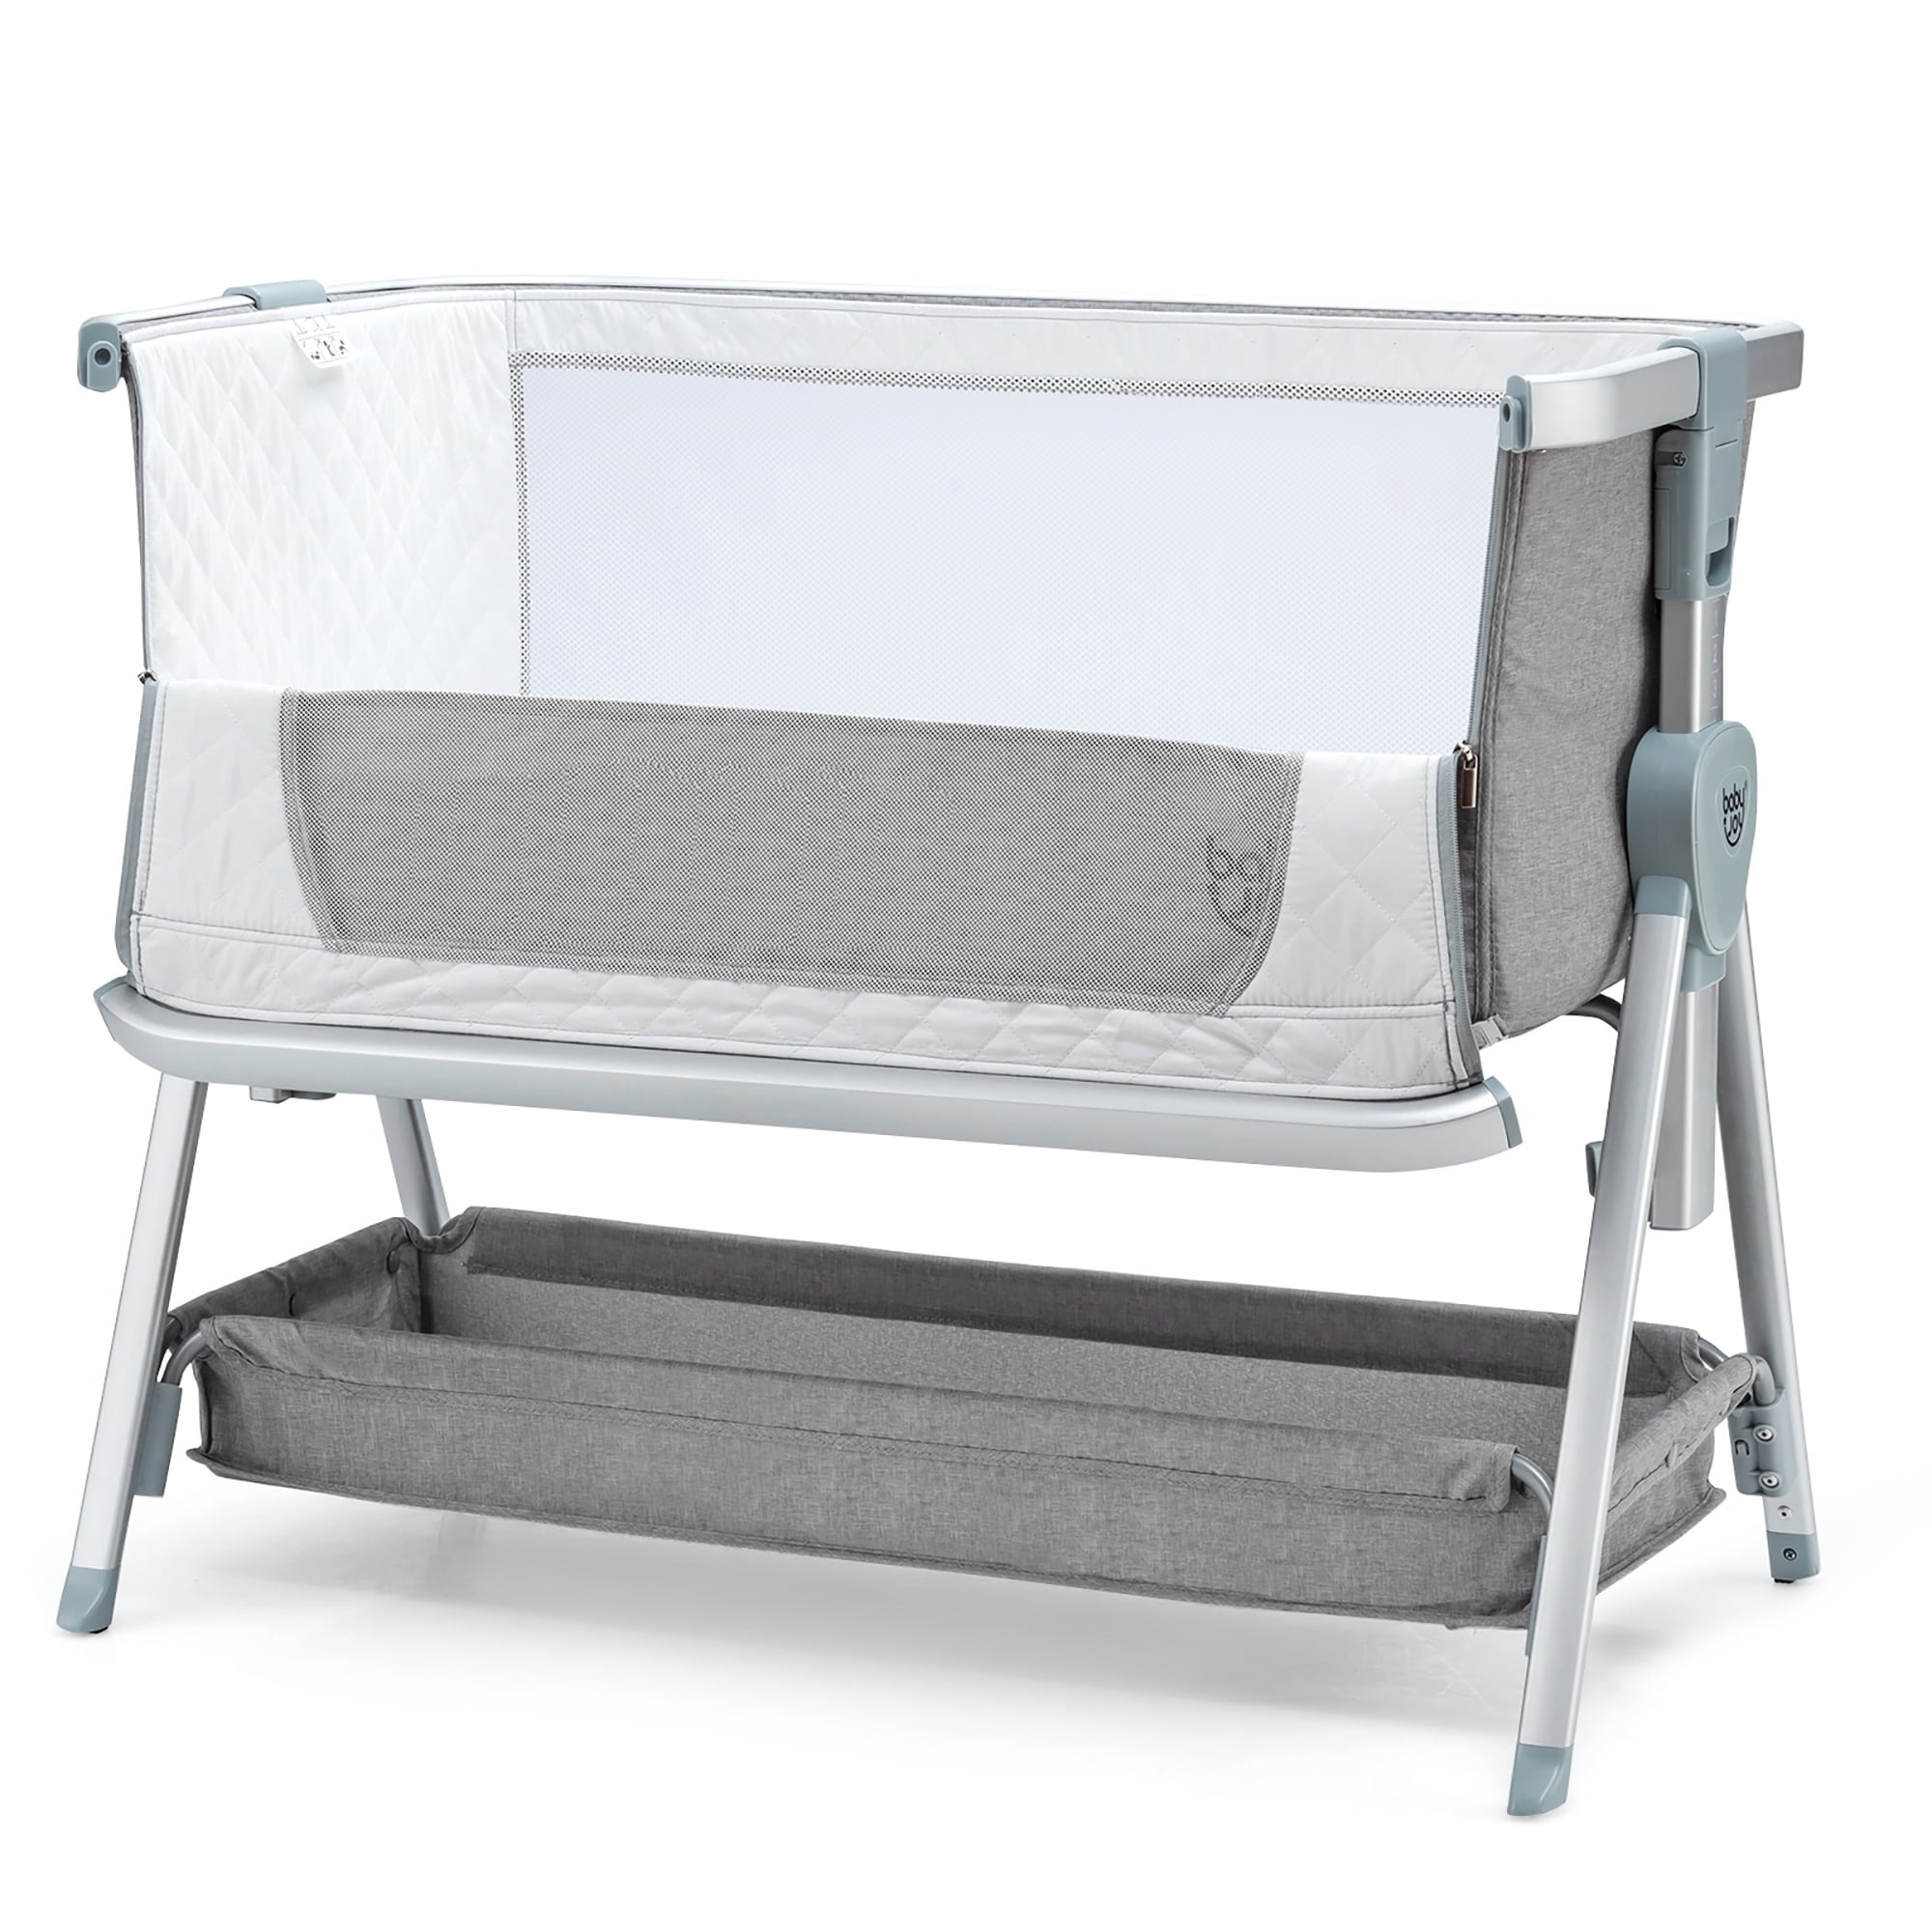 Portable Baby Bassinet Travel Bed Crib with Mattress and Storage Basket Height Adjustable Easy Folding Sleeper for Newborn Infant/Baby Boy/Baby Girl Khaki 2 in 1 Bedside Sleeper Crib 